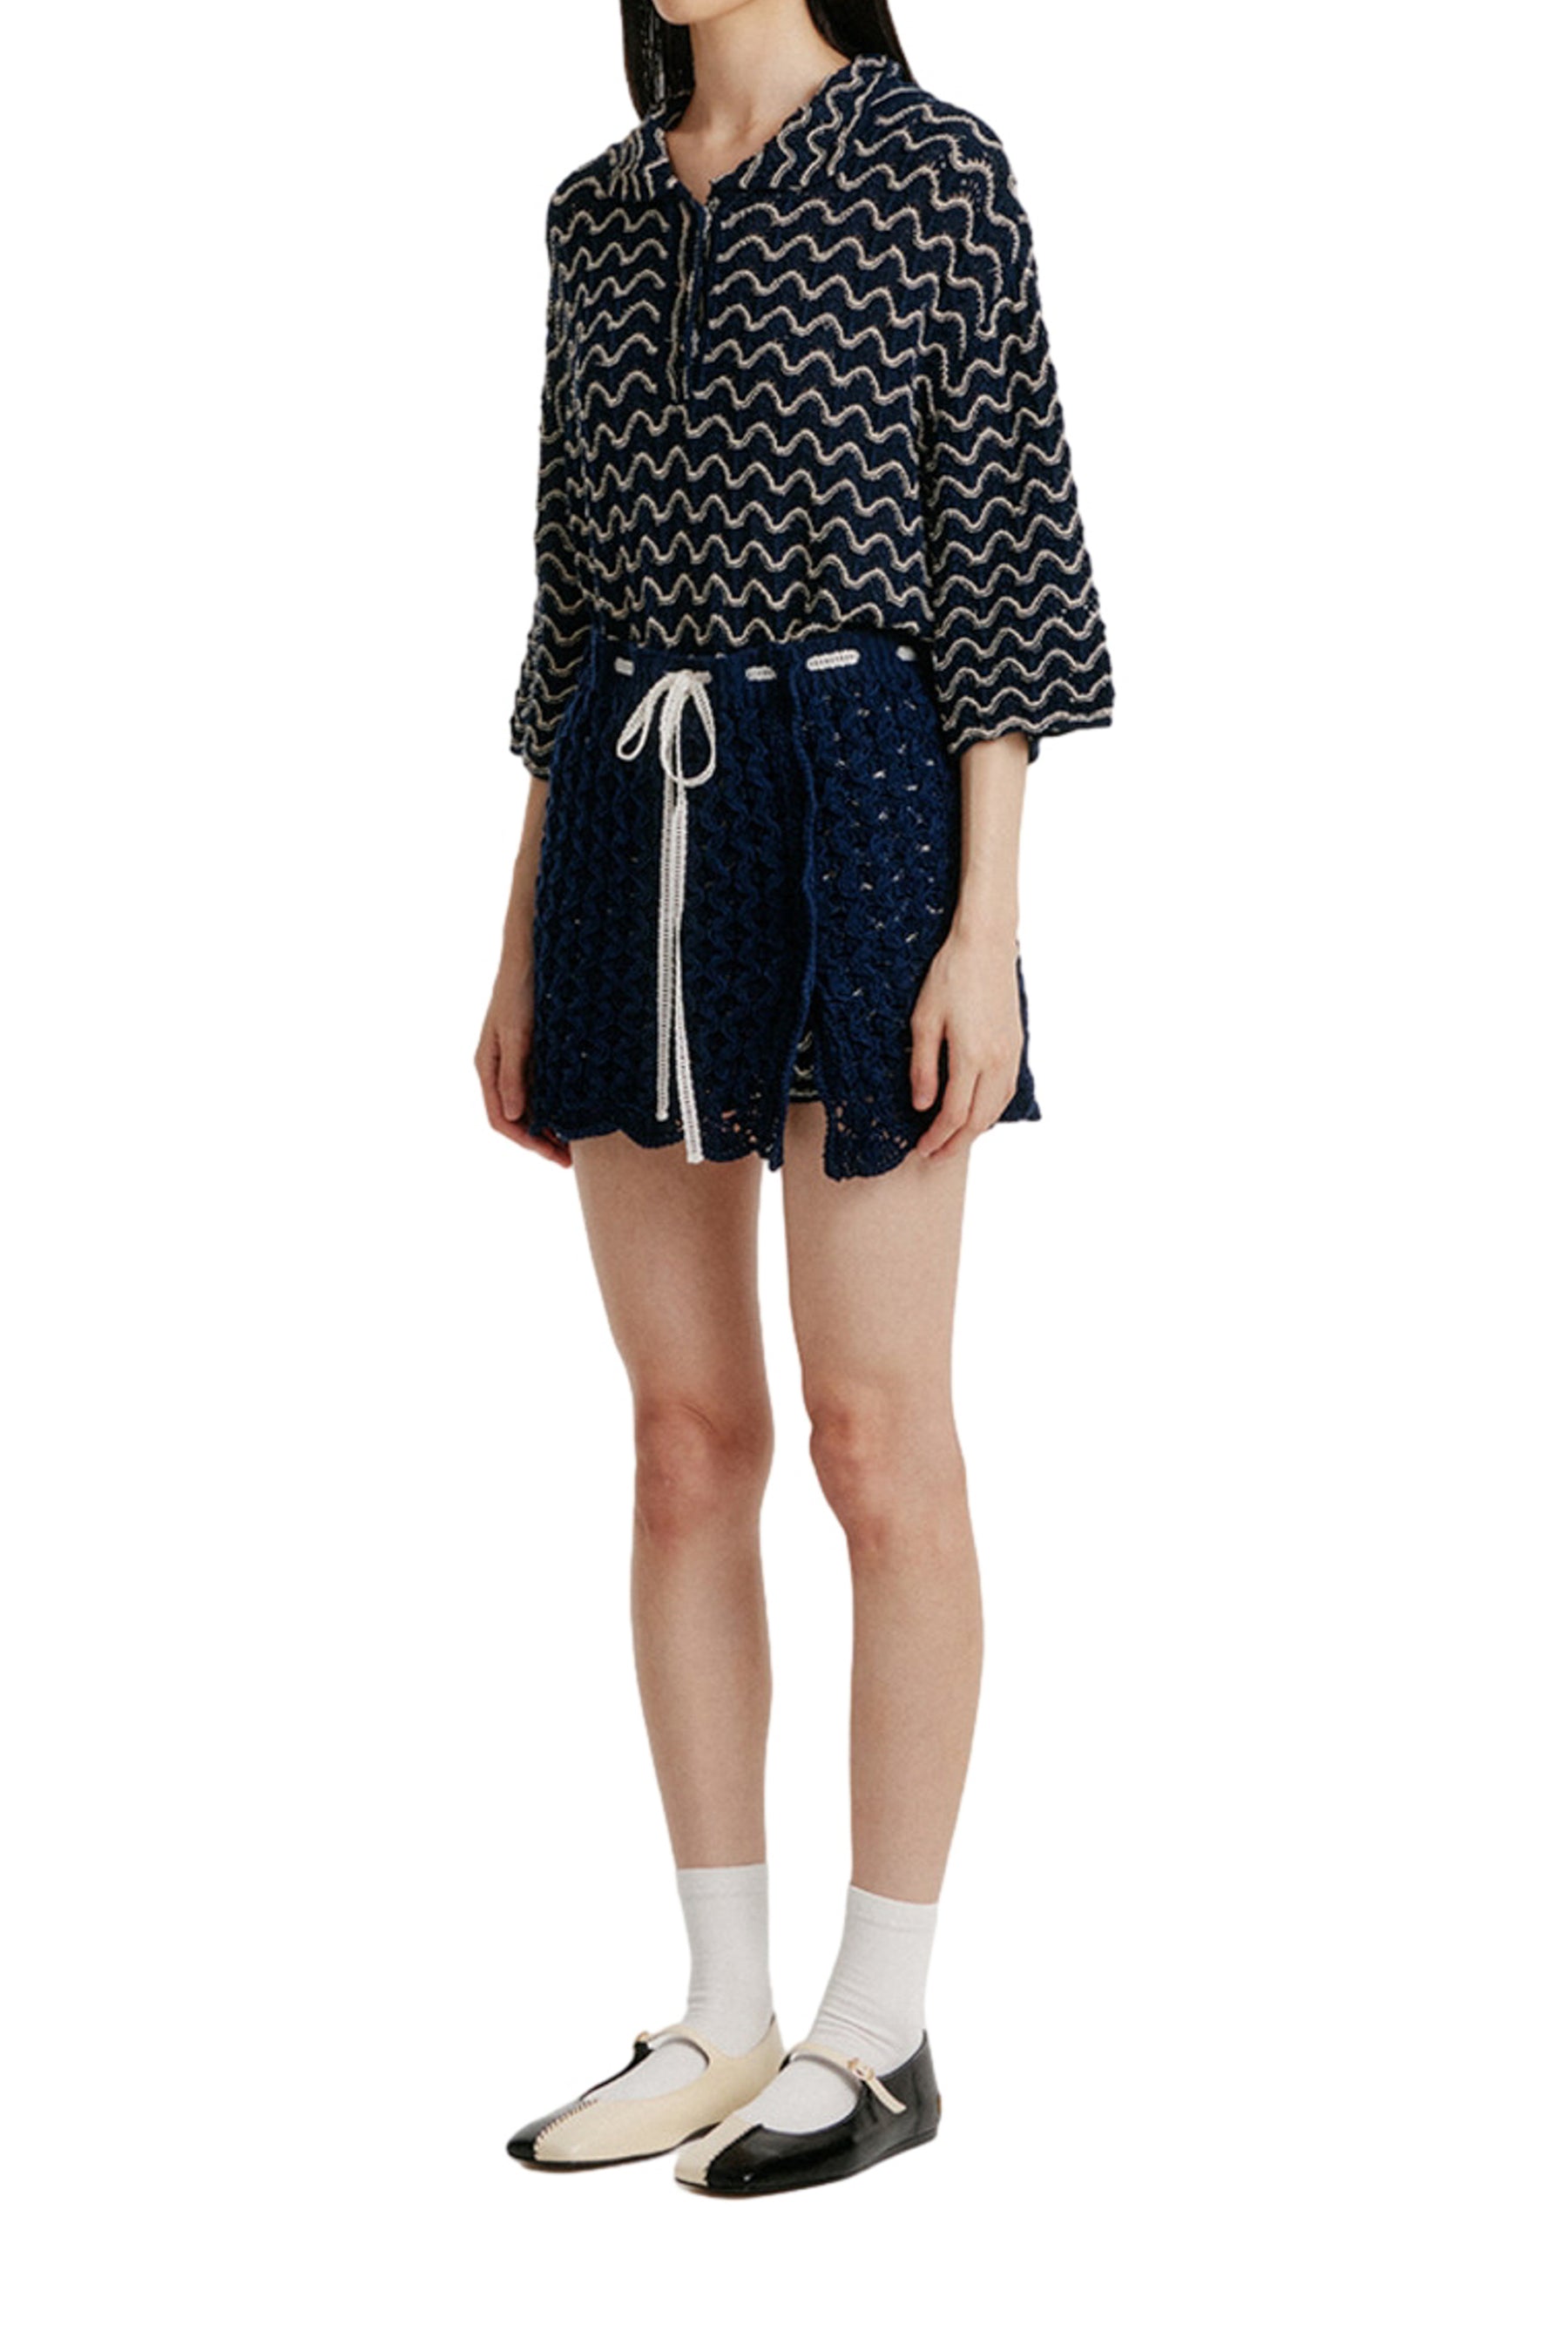 CABLE KNIT MINI SKIRT / NVY